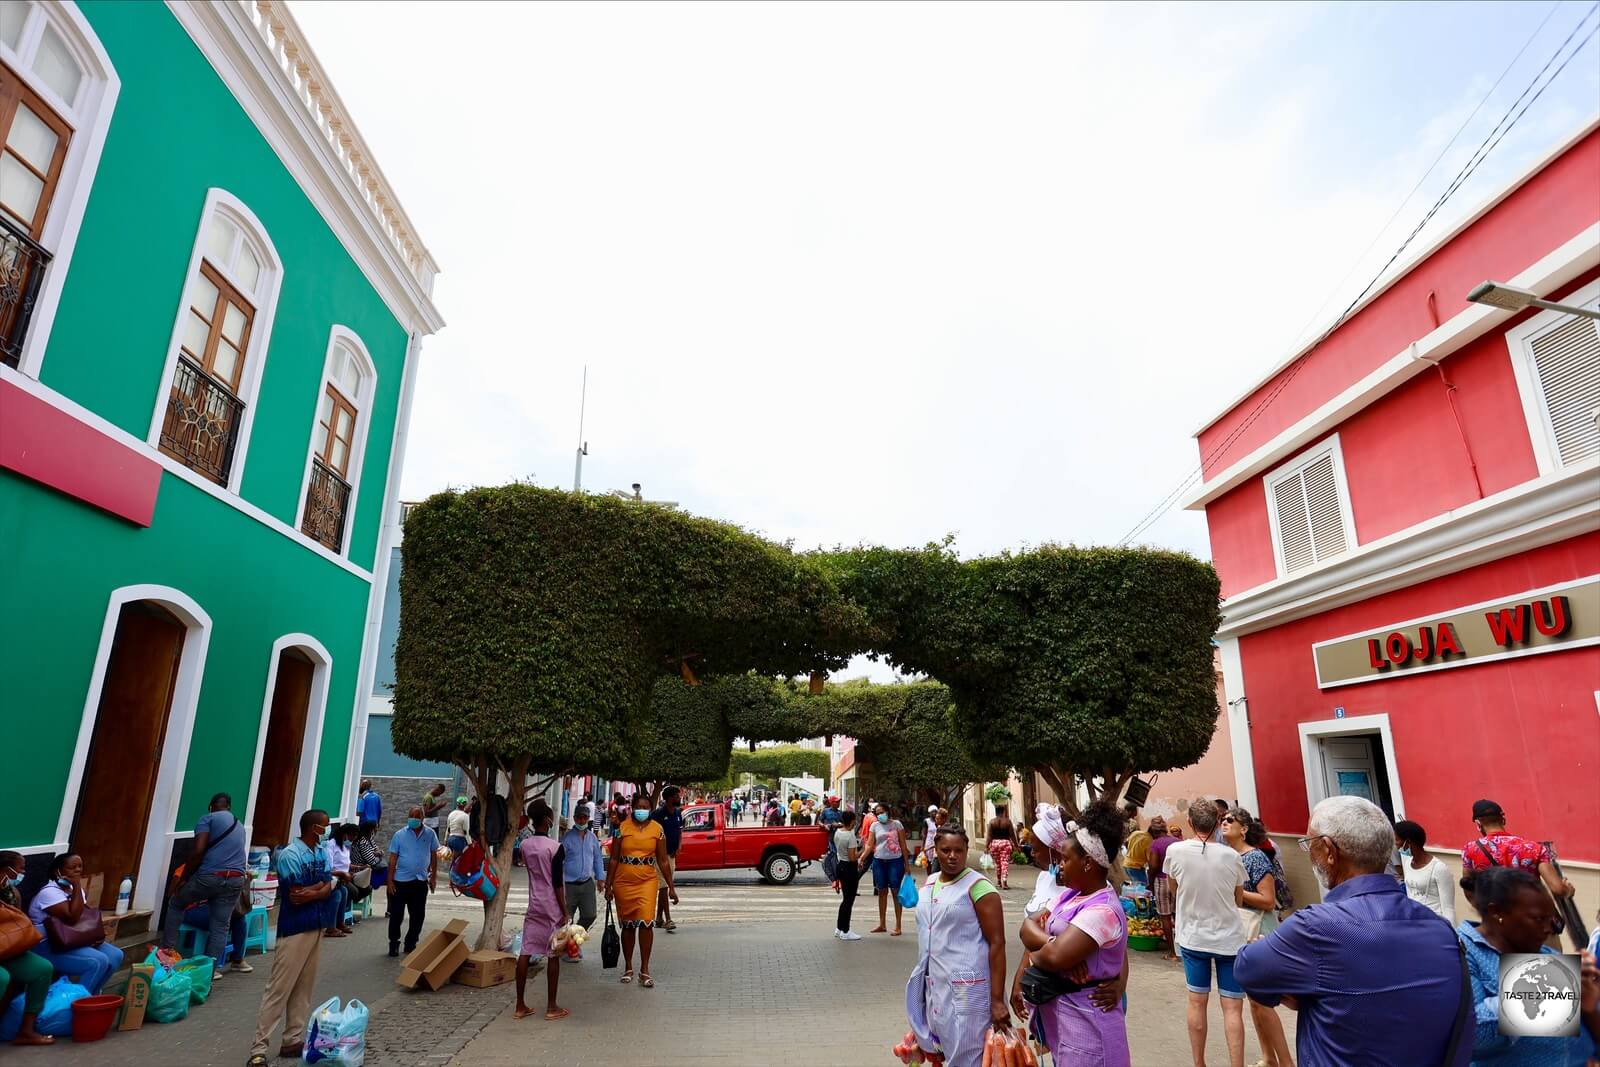 The main pedestrian street of Praia - the Peatonal - is lined with restaurants, cafes and bars.